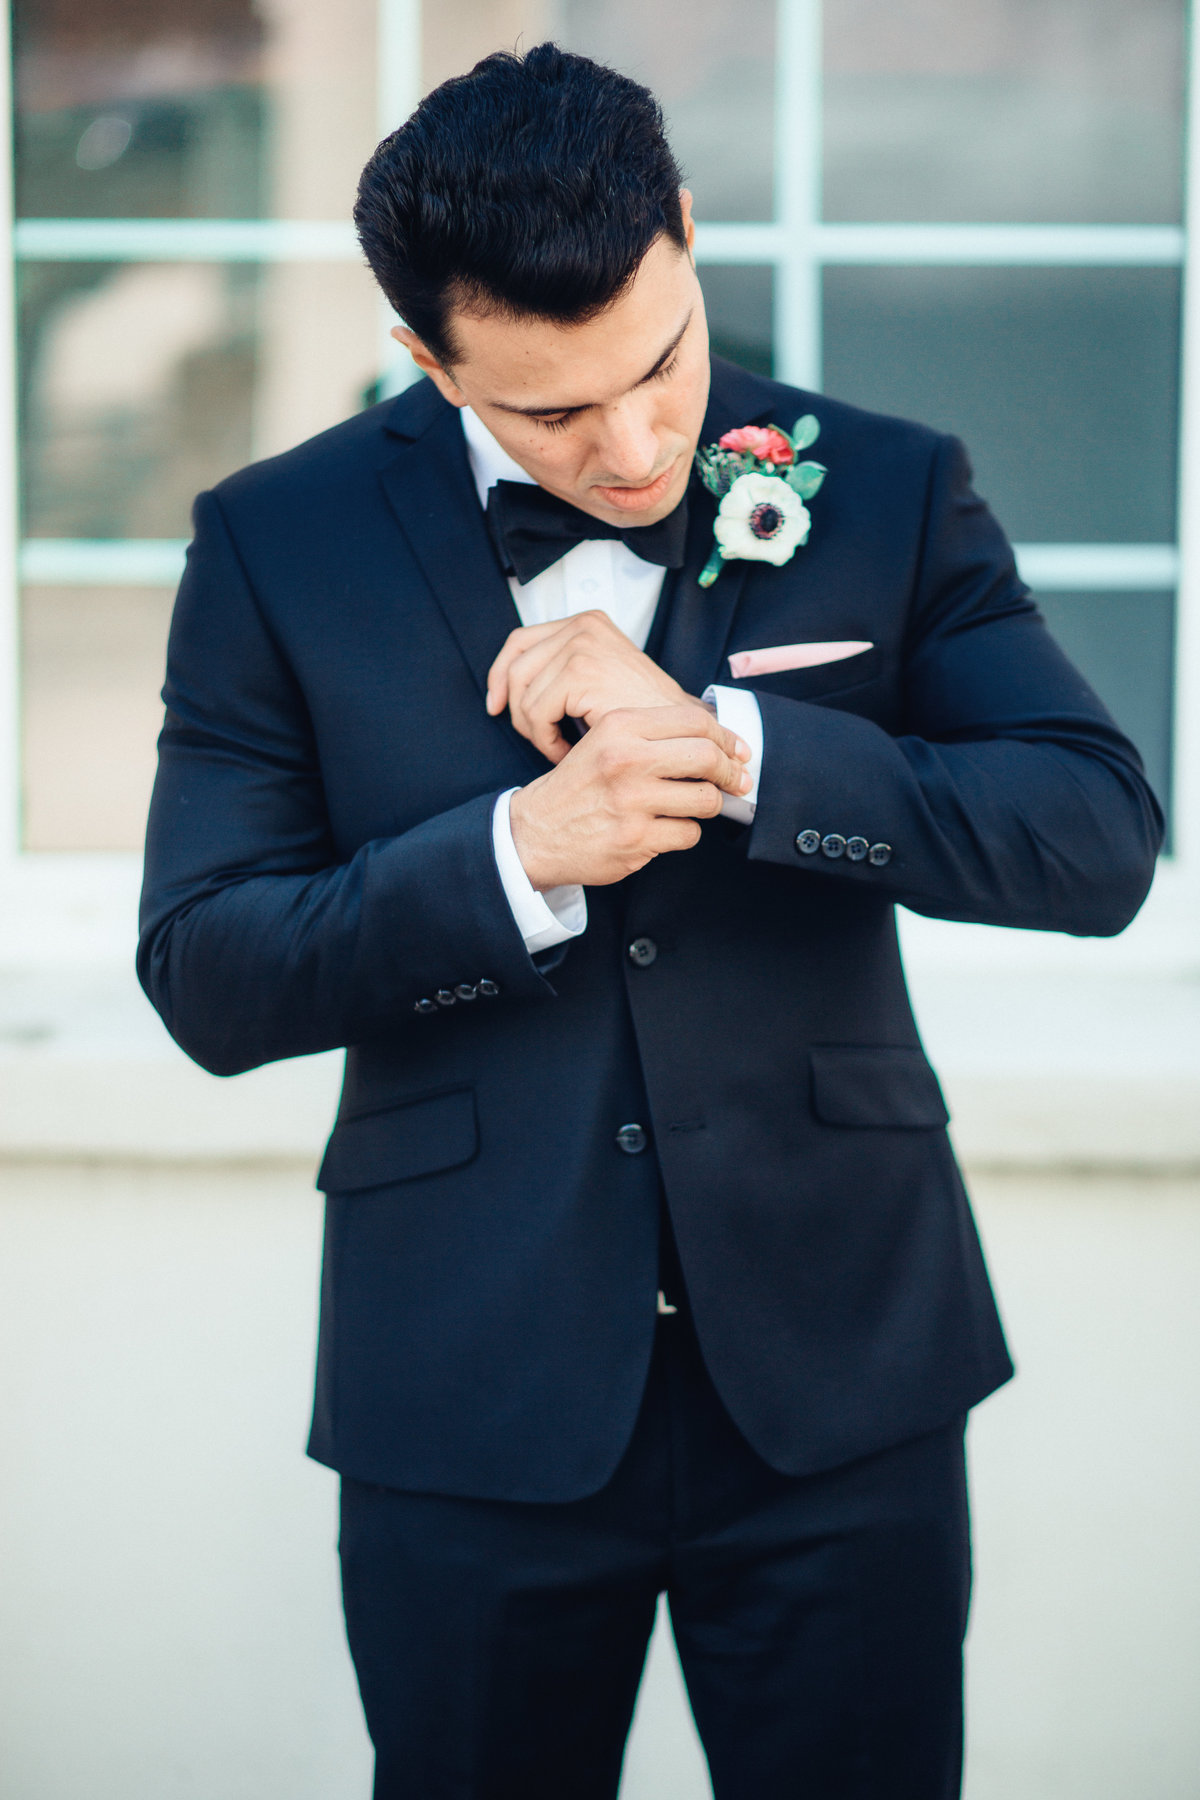 Wedding Photograph Of Groom Fixing His Black Suit Los Angeles